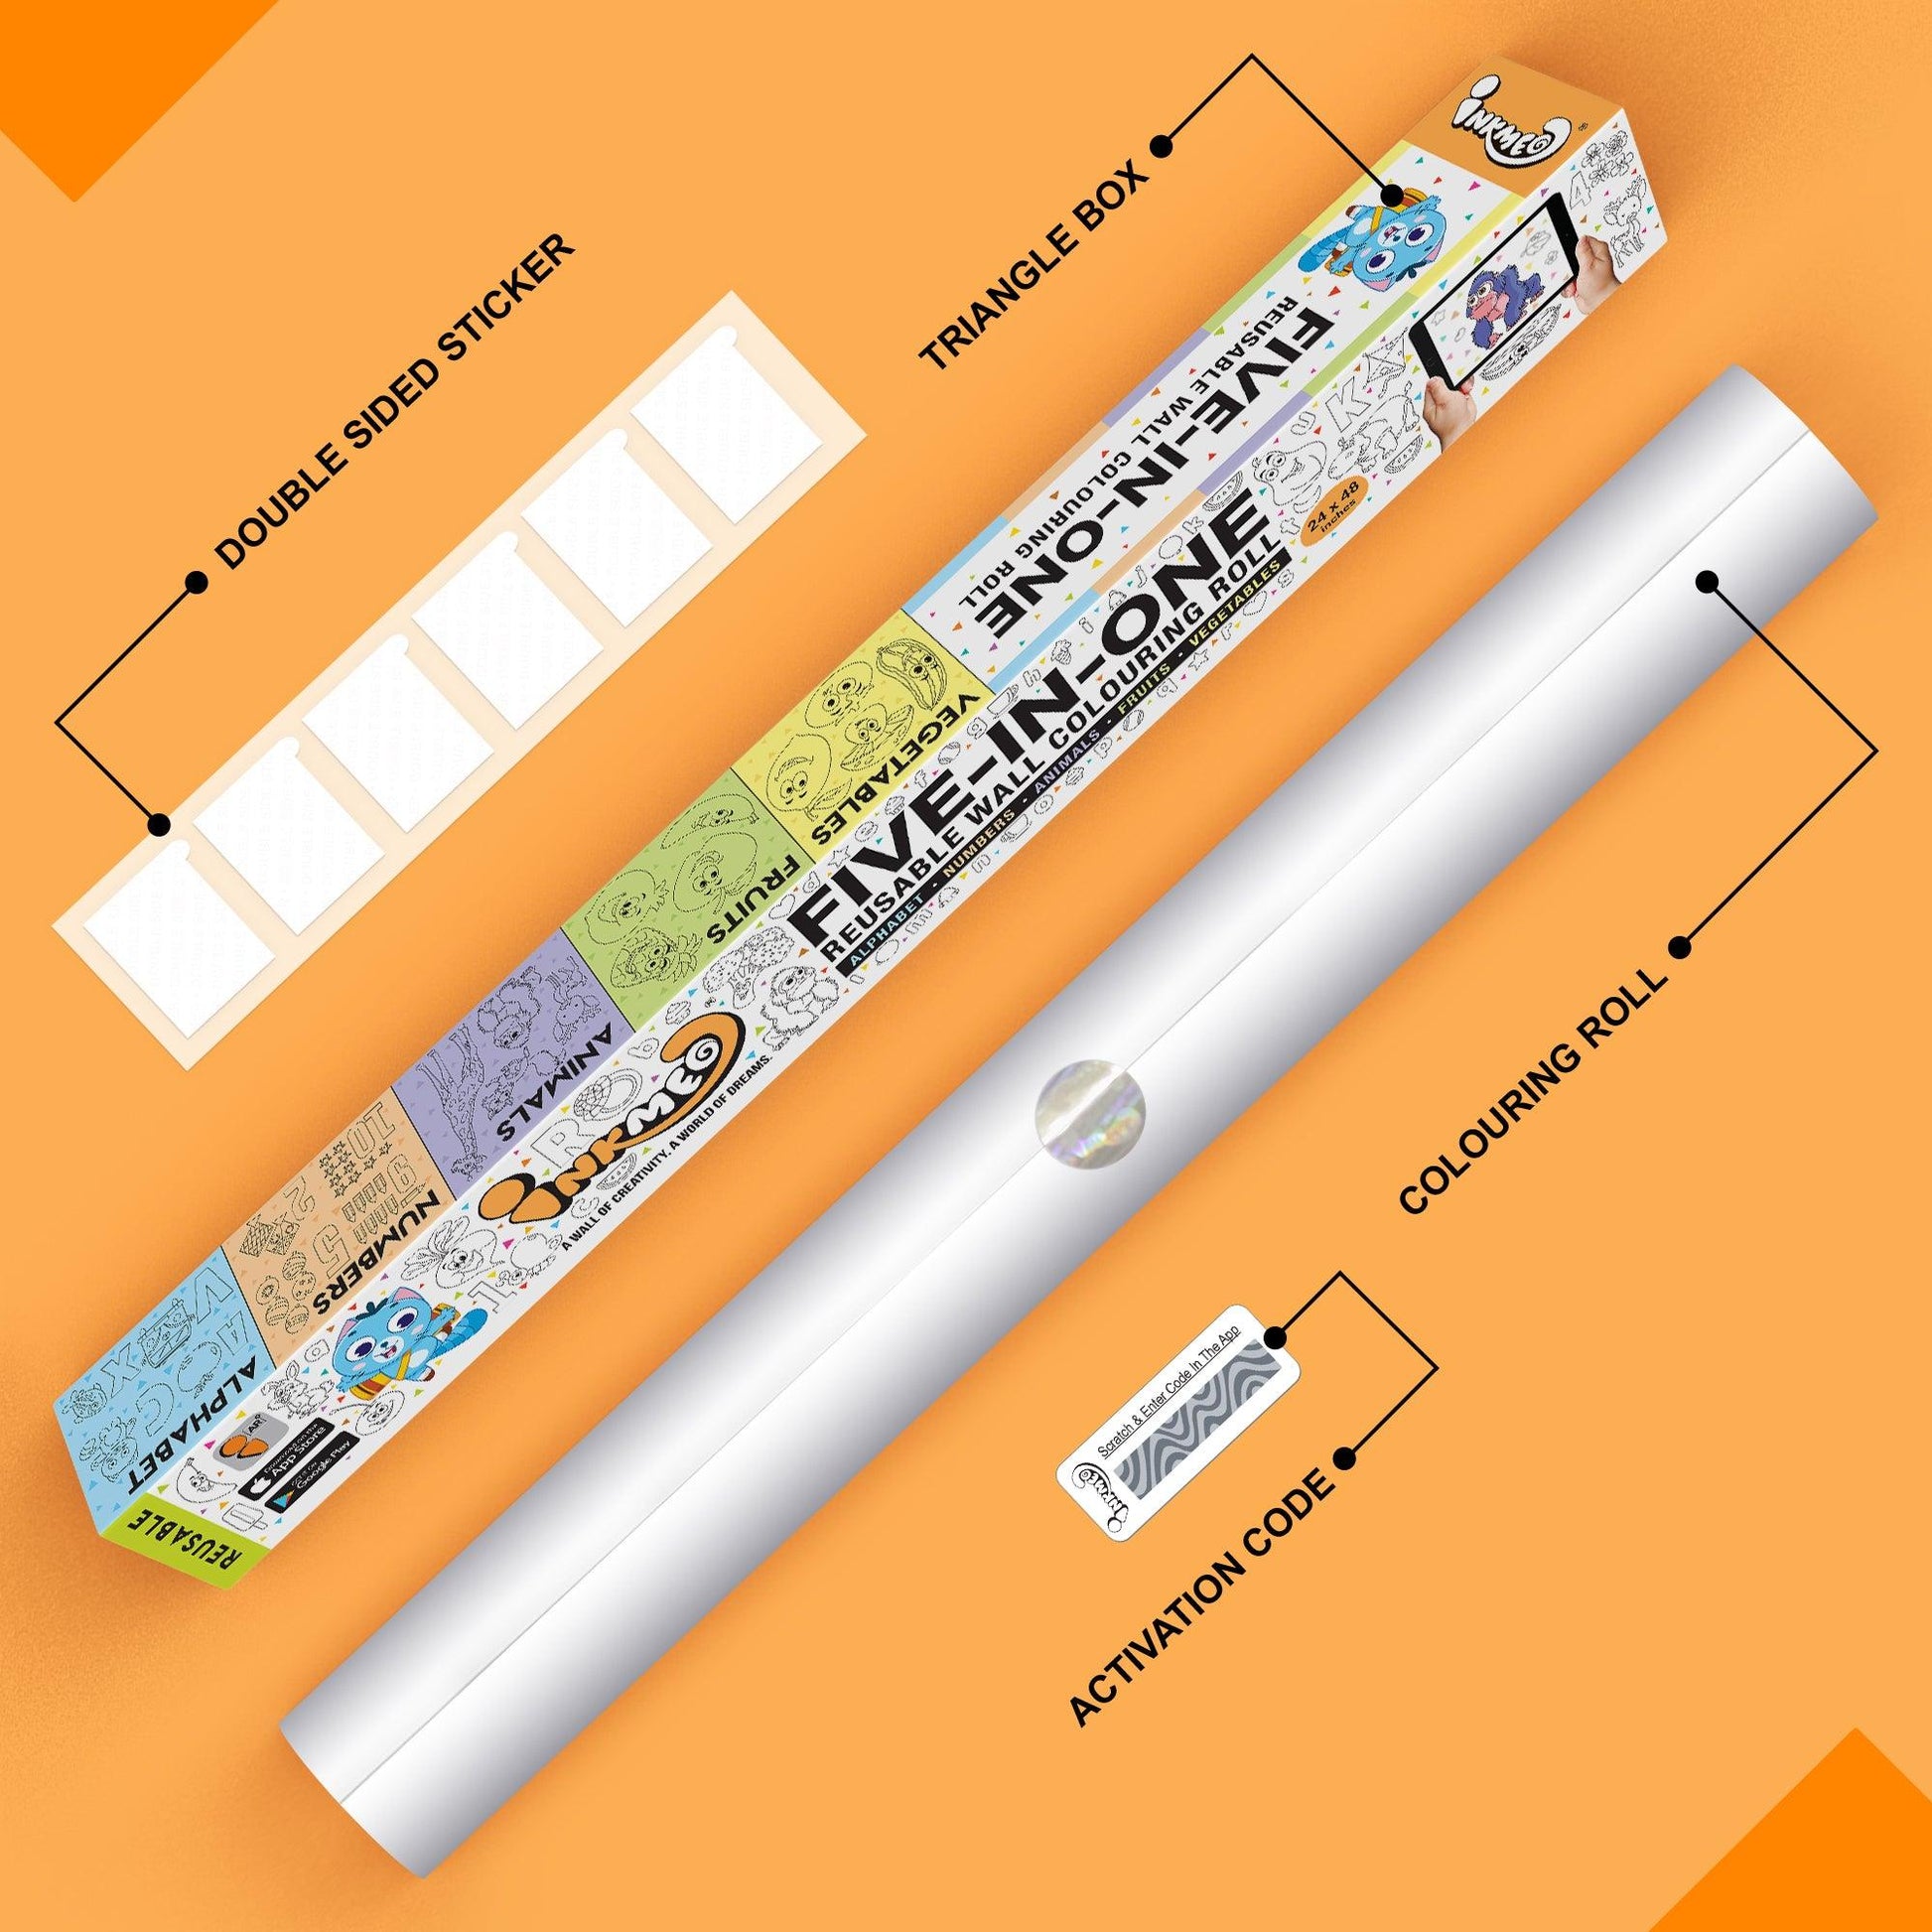 The image illustrates a orange background with Triangle box, colouring roll, 6 double tape, and activation code